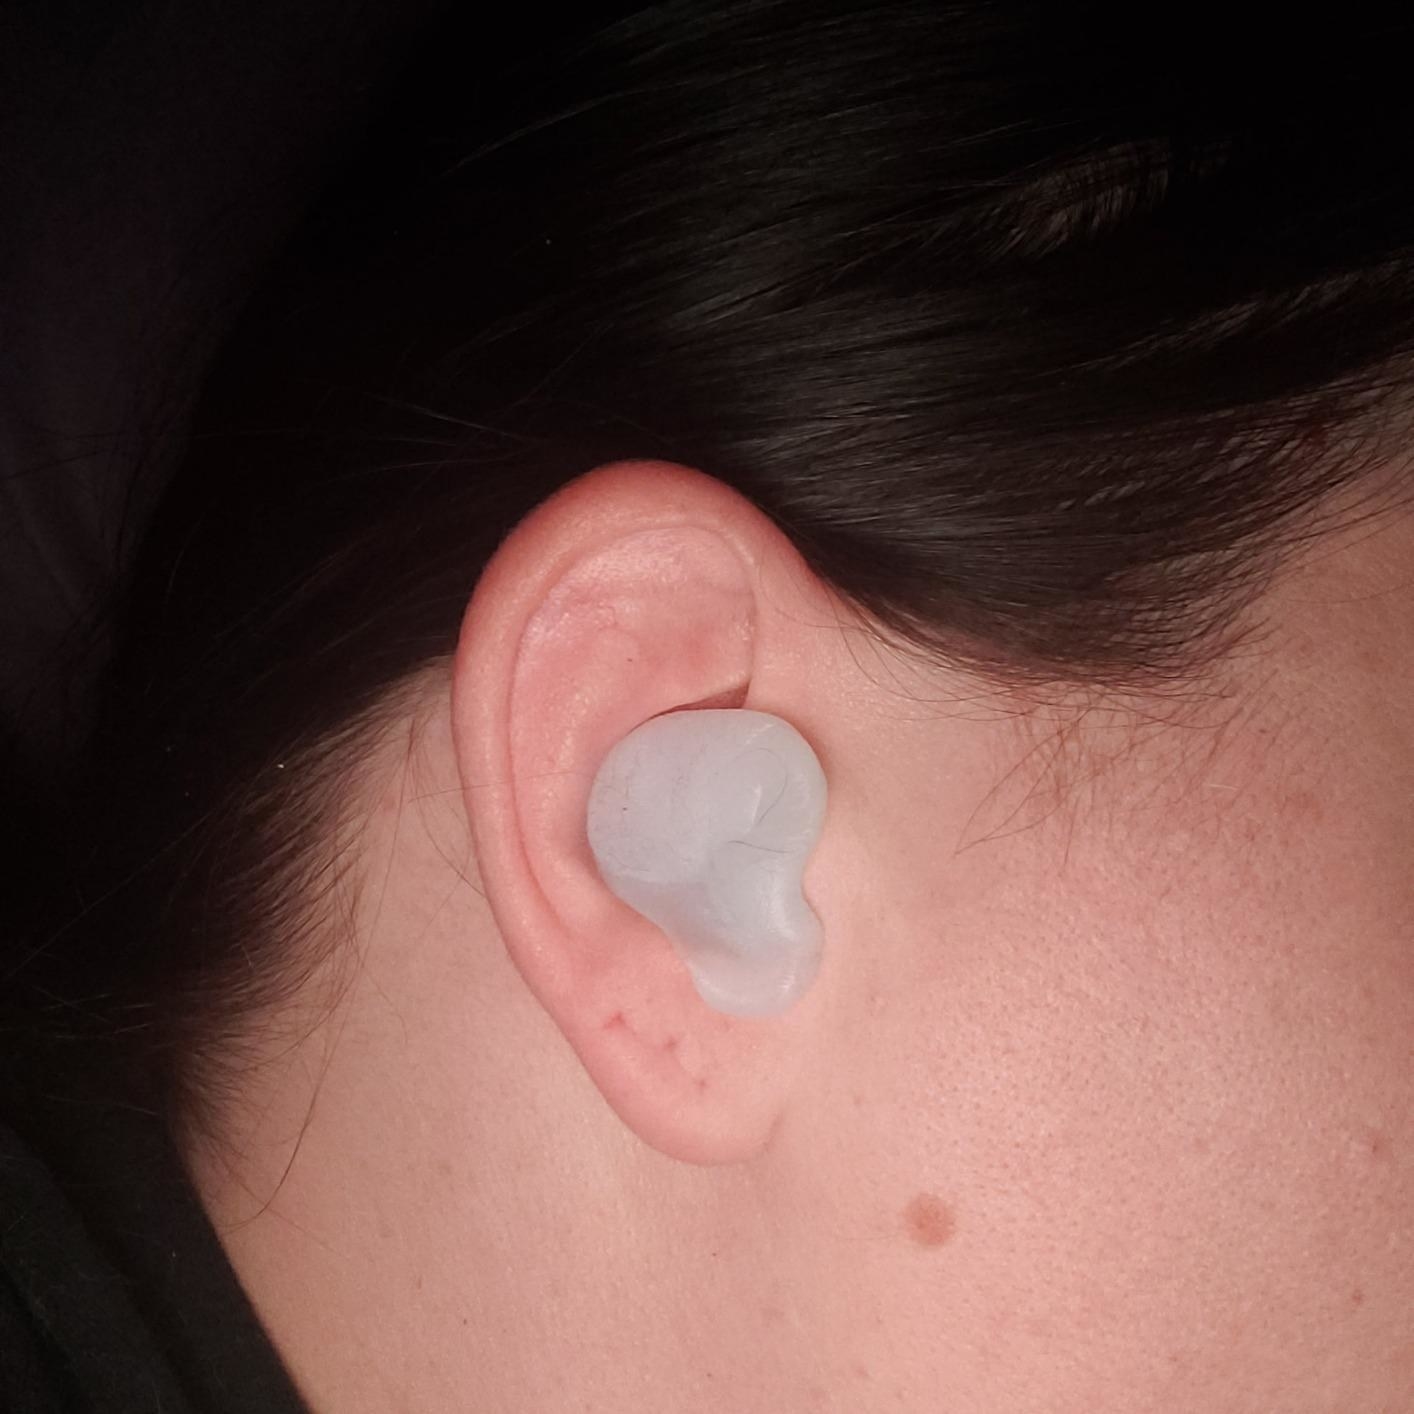 A reviewer&#x27;s ear with the semi-opaque white, putty-like earplugs covering the opening